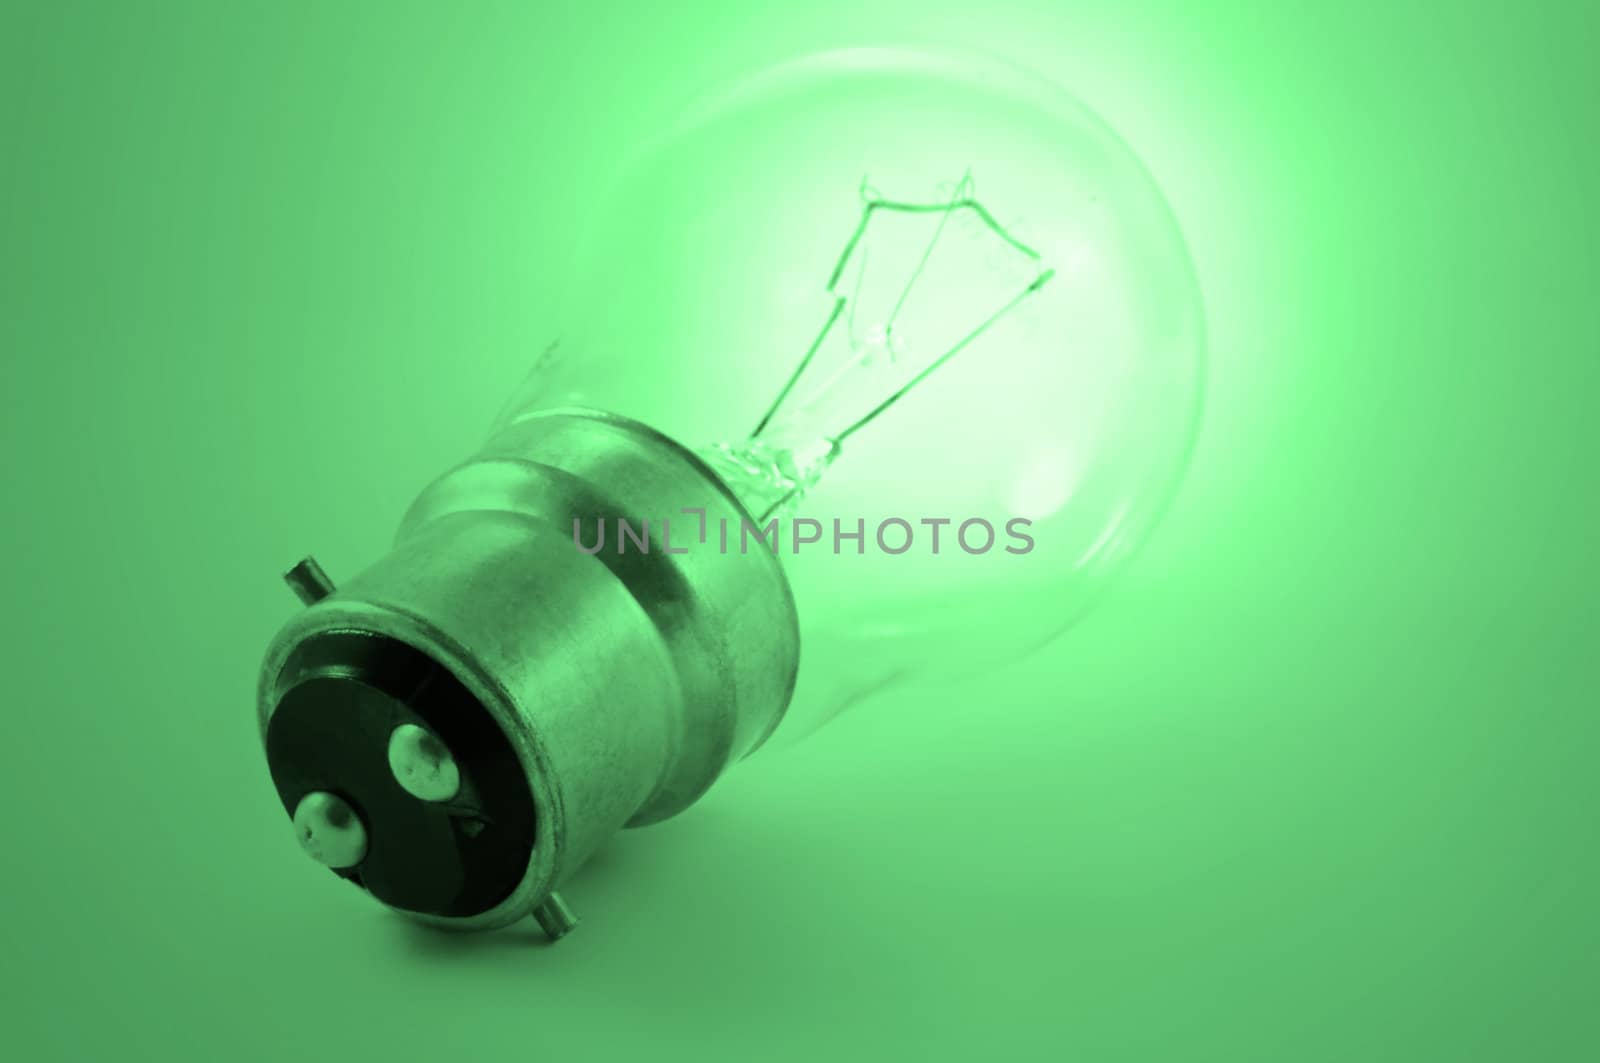 Close up of a single illuminated light bulb with green light effect